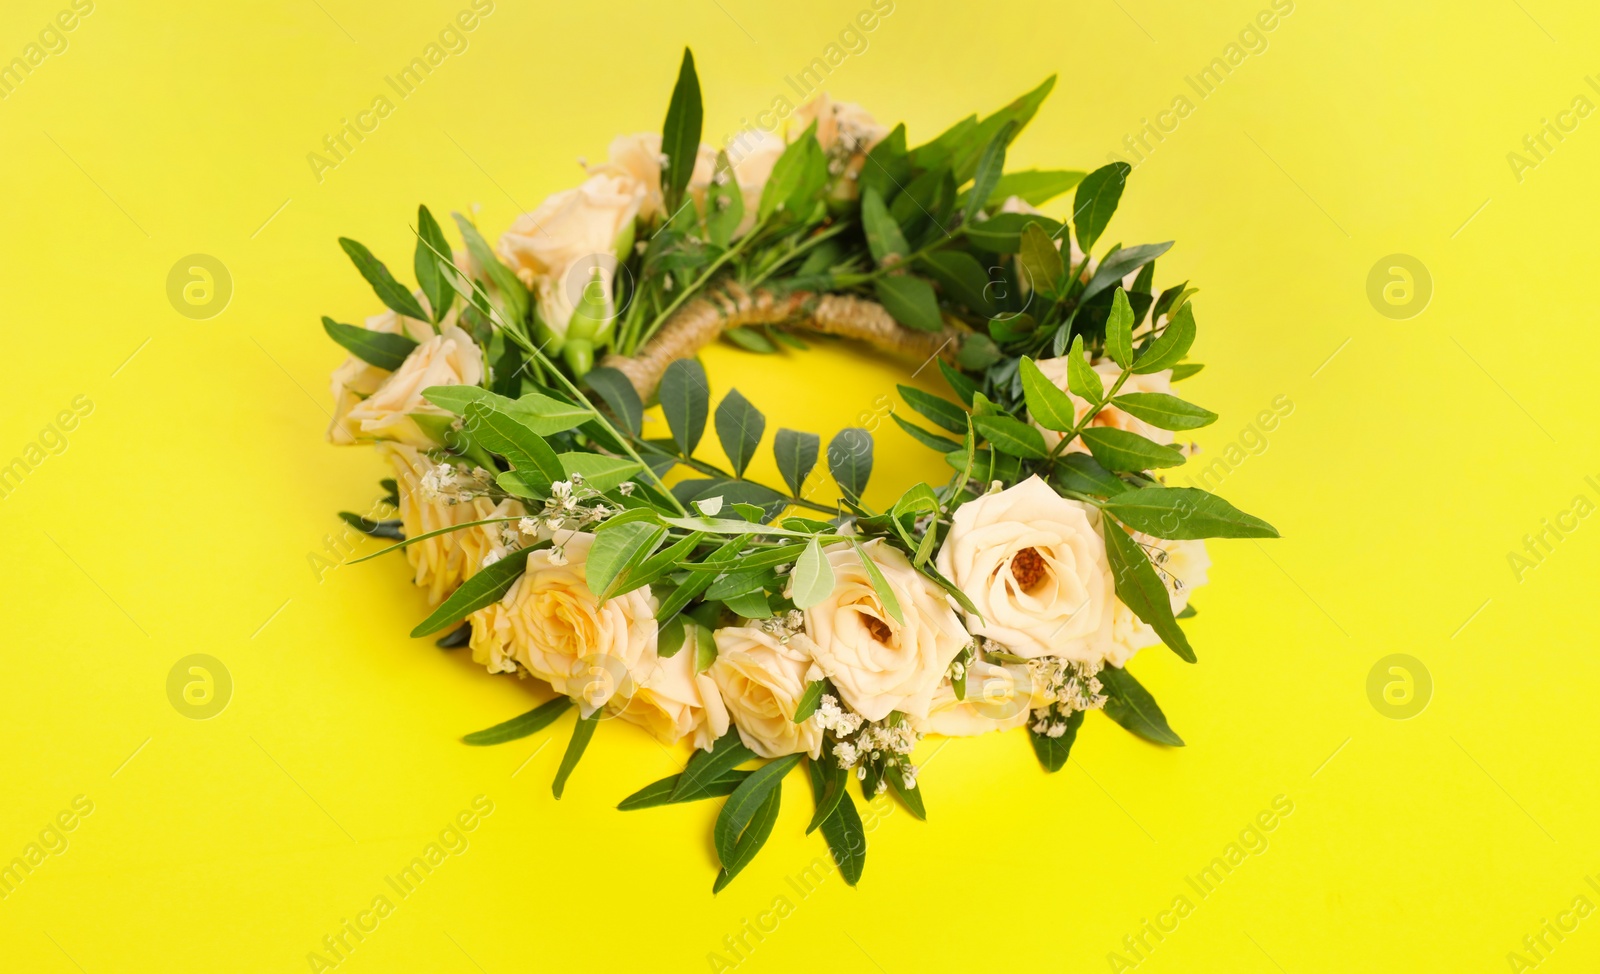 Photo of Wreath made of beautiful flowers on yellow background